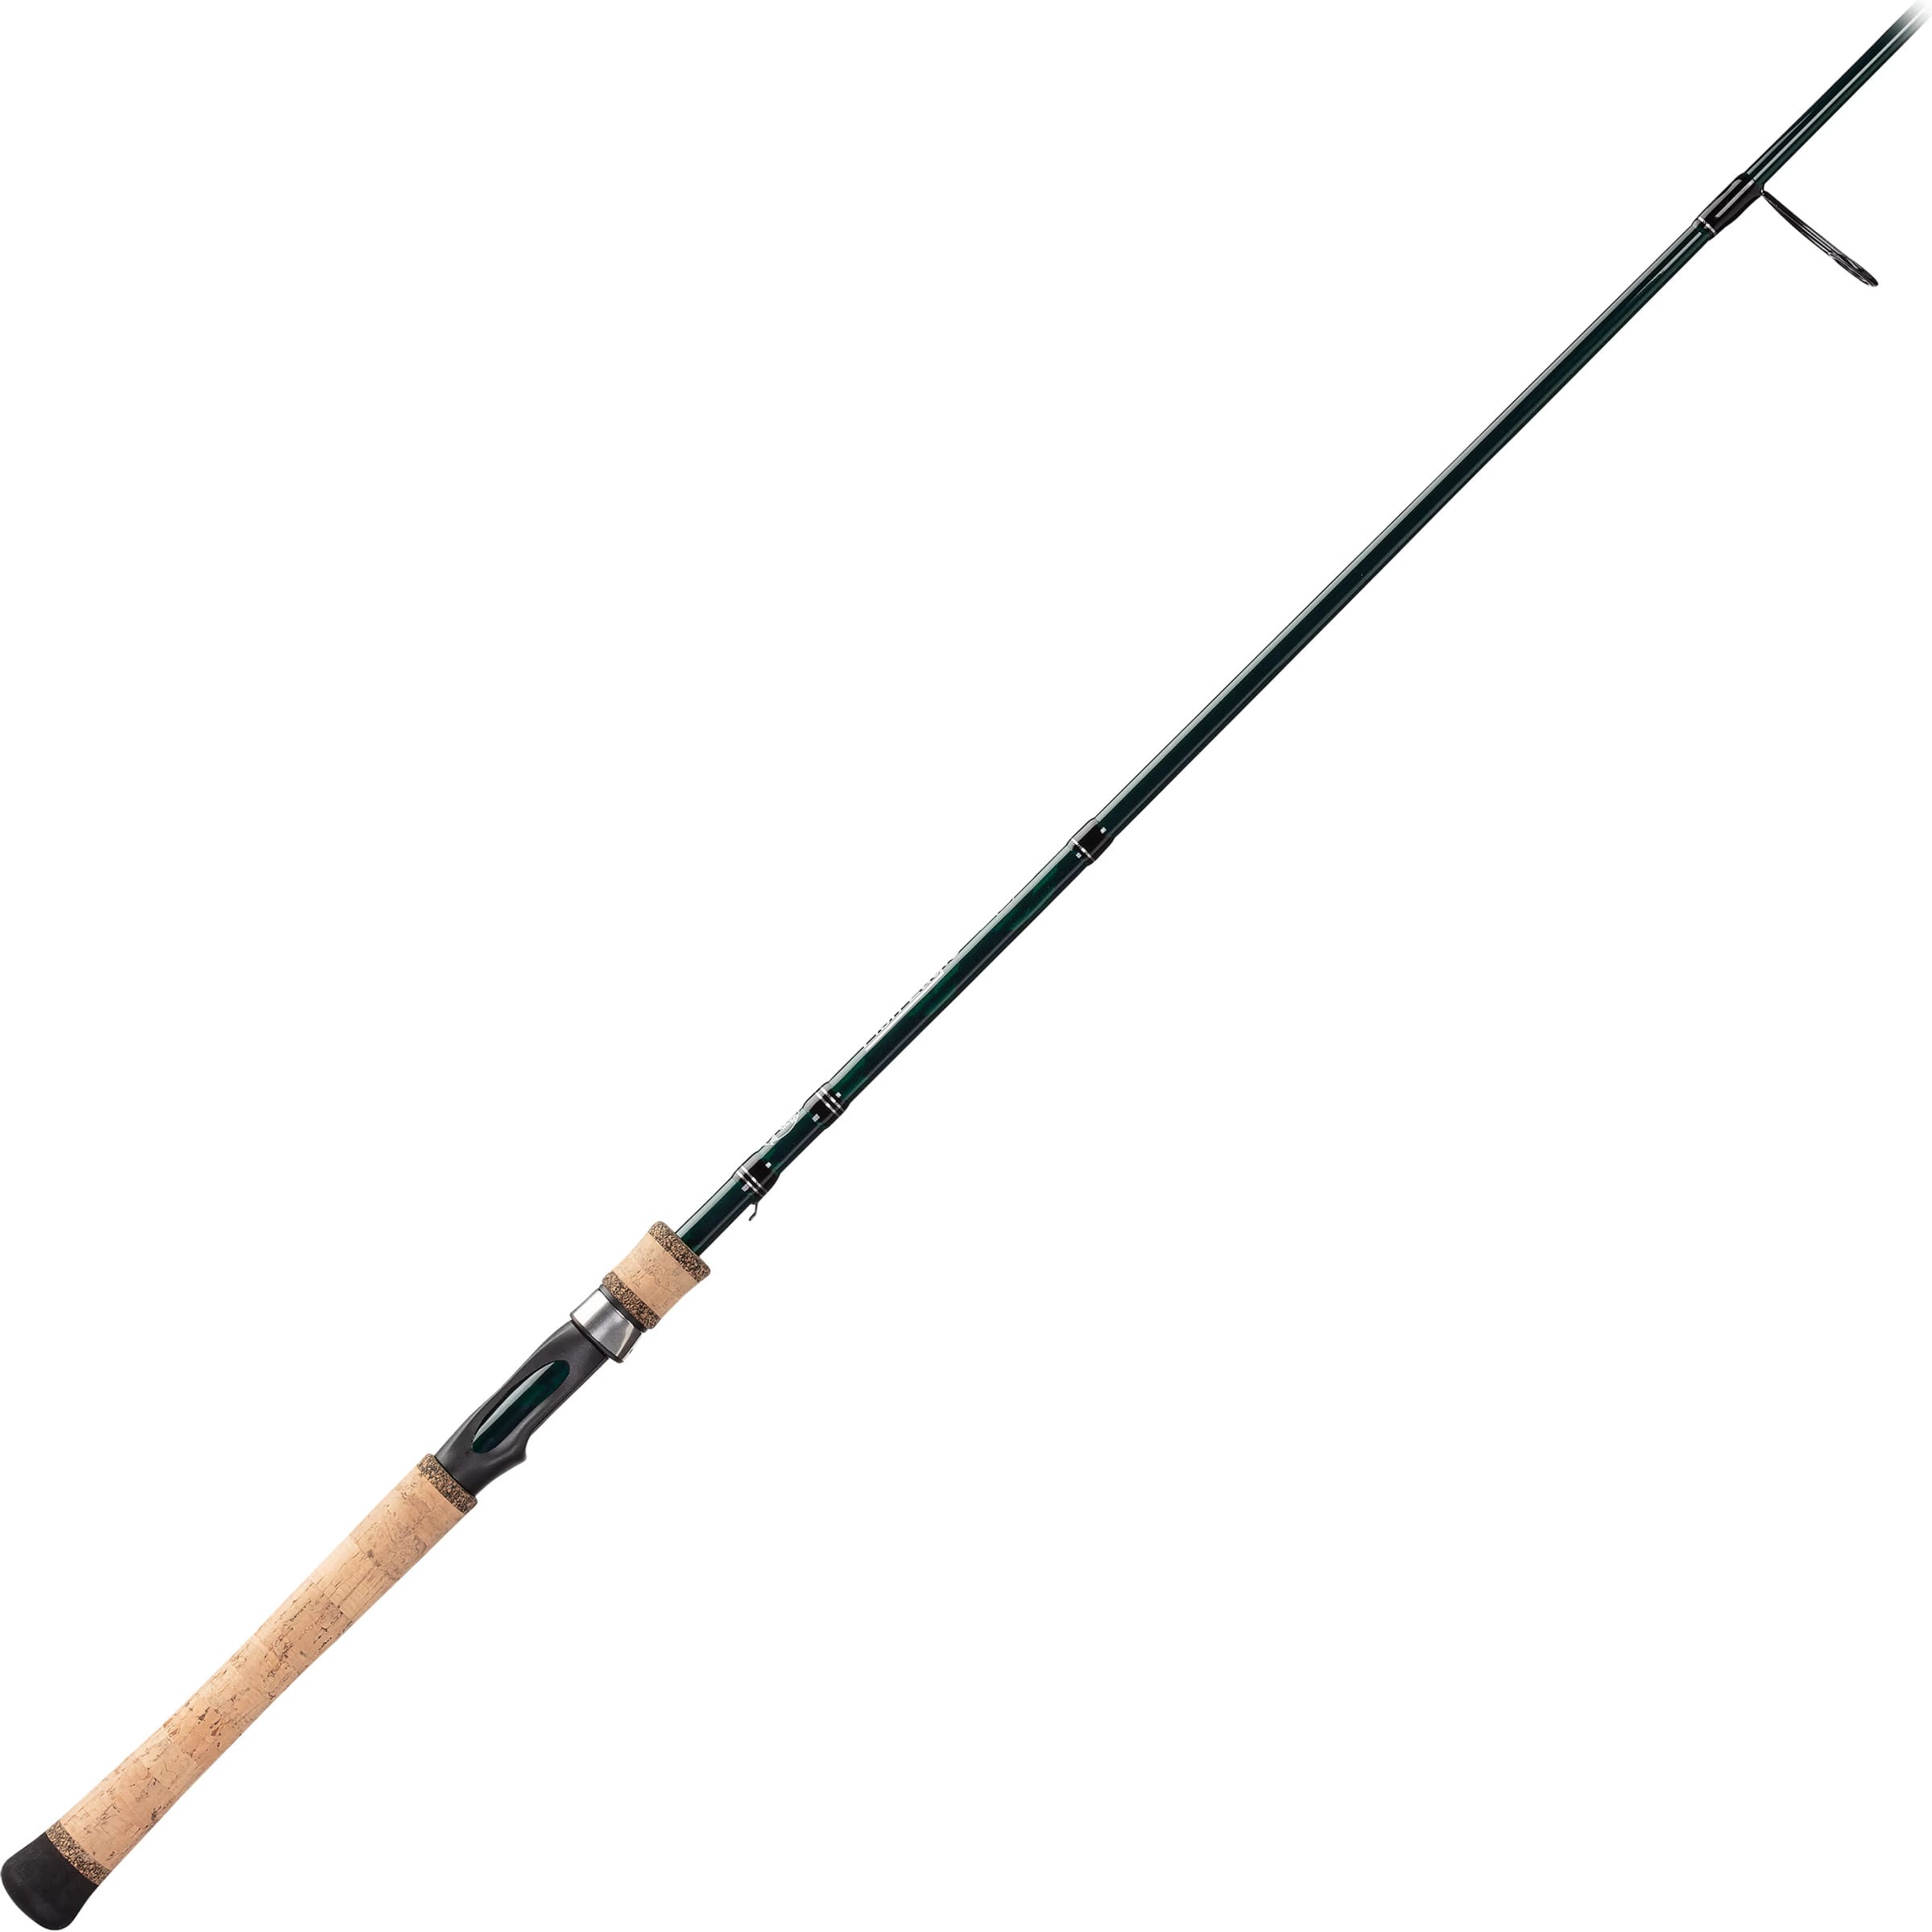 Shark Rod Casting Fishing Rods & Poles for sale